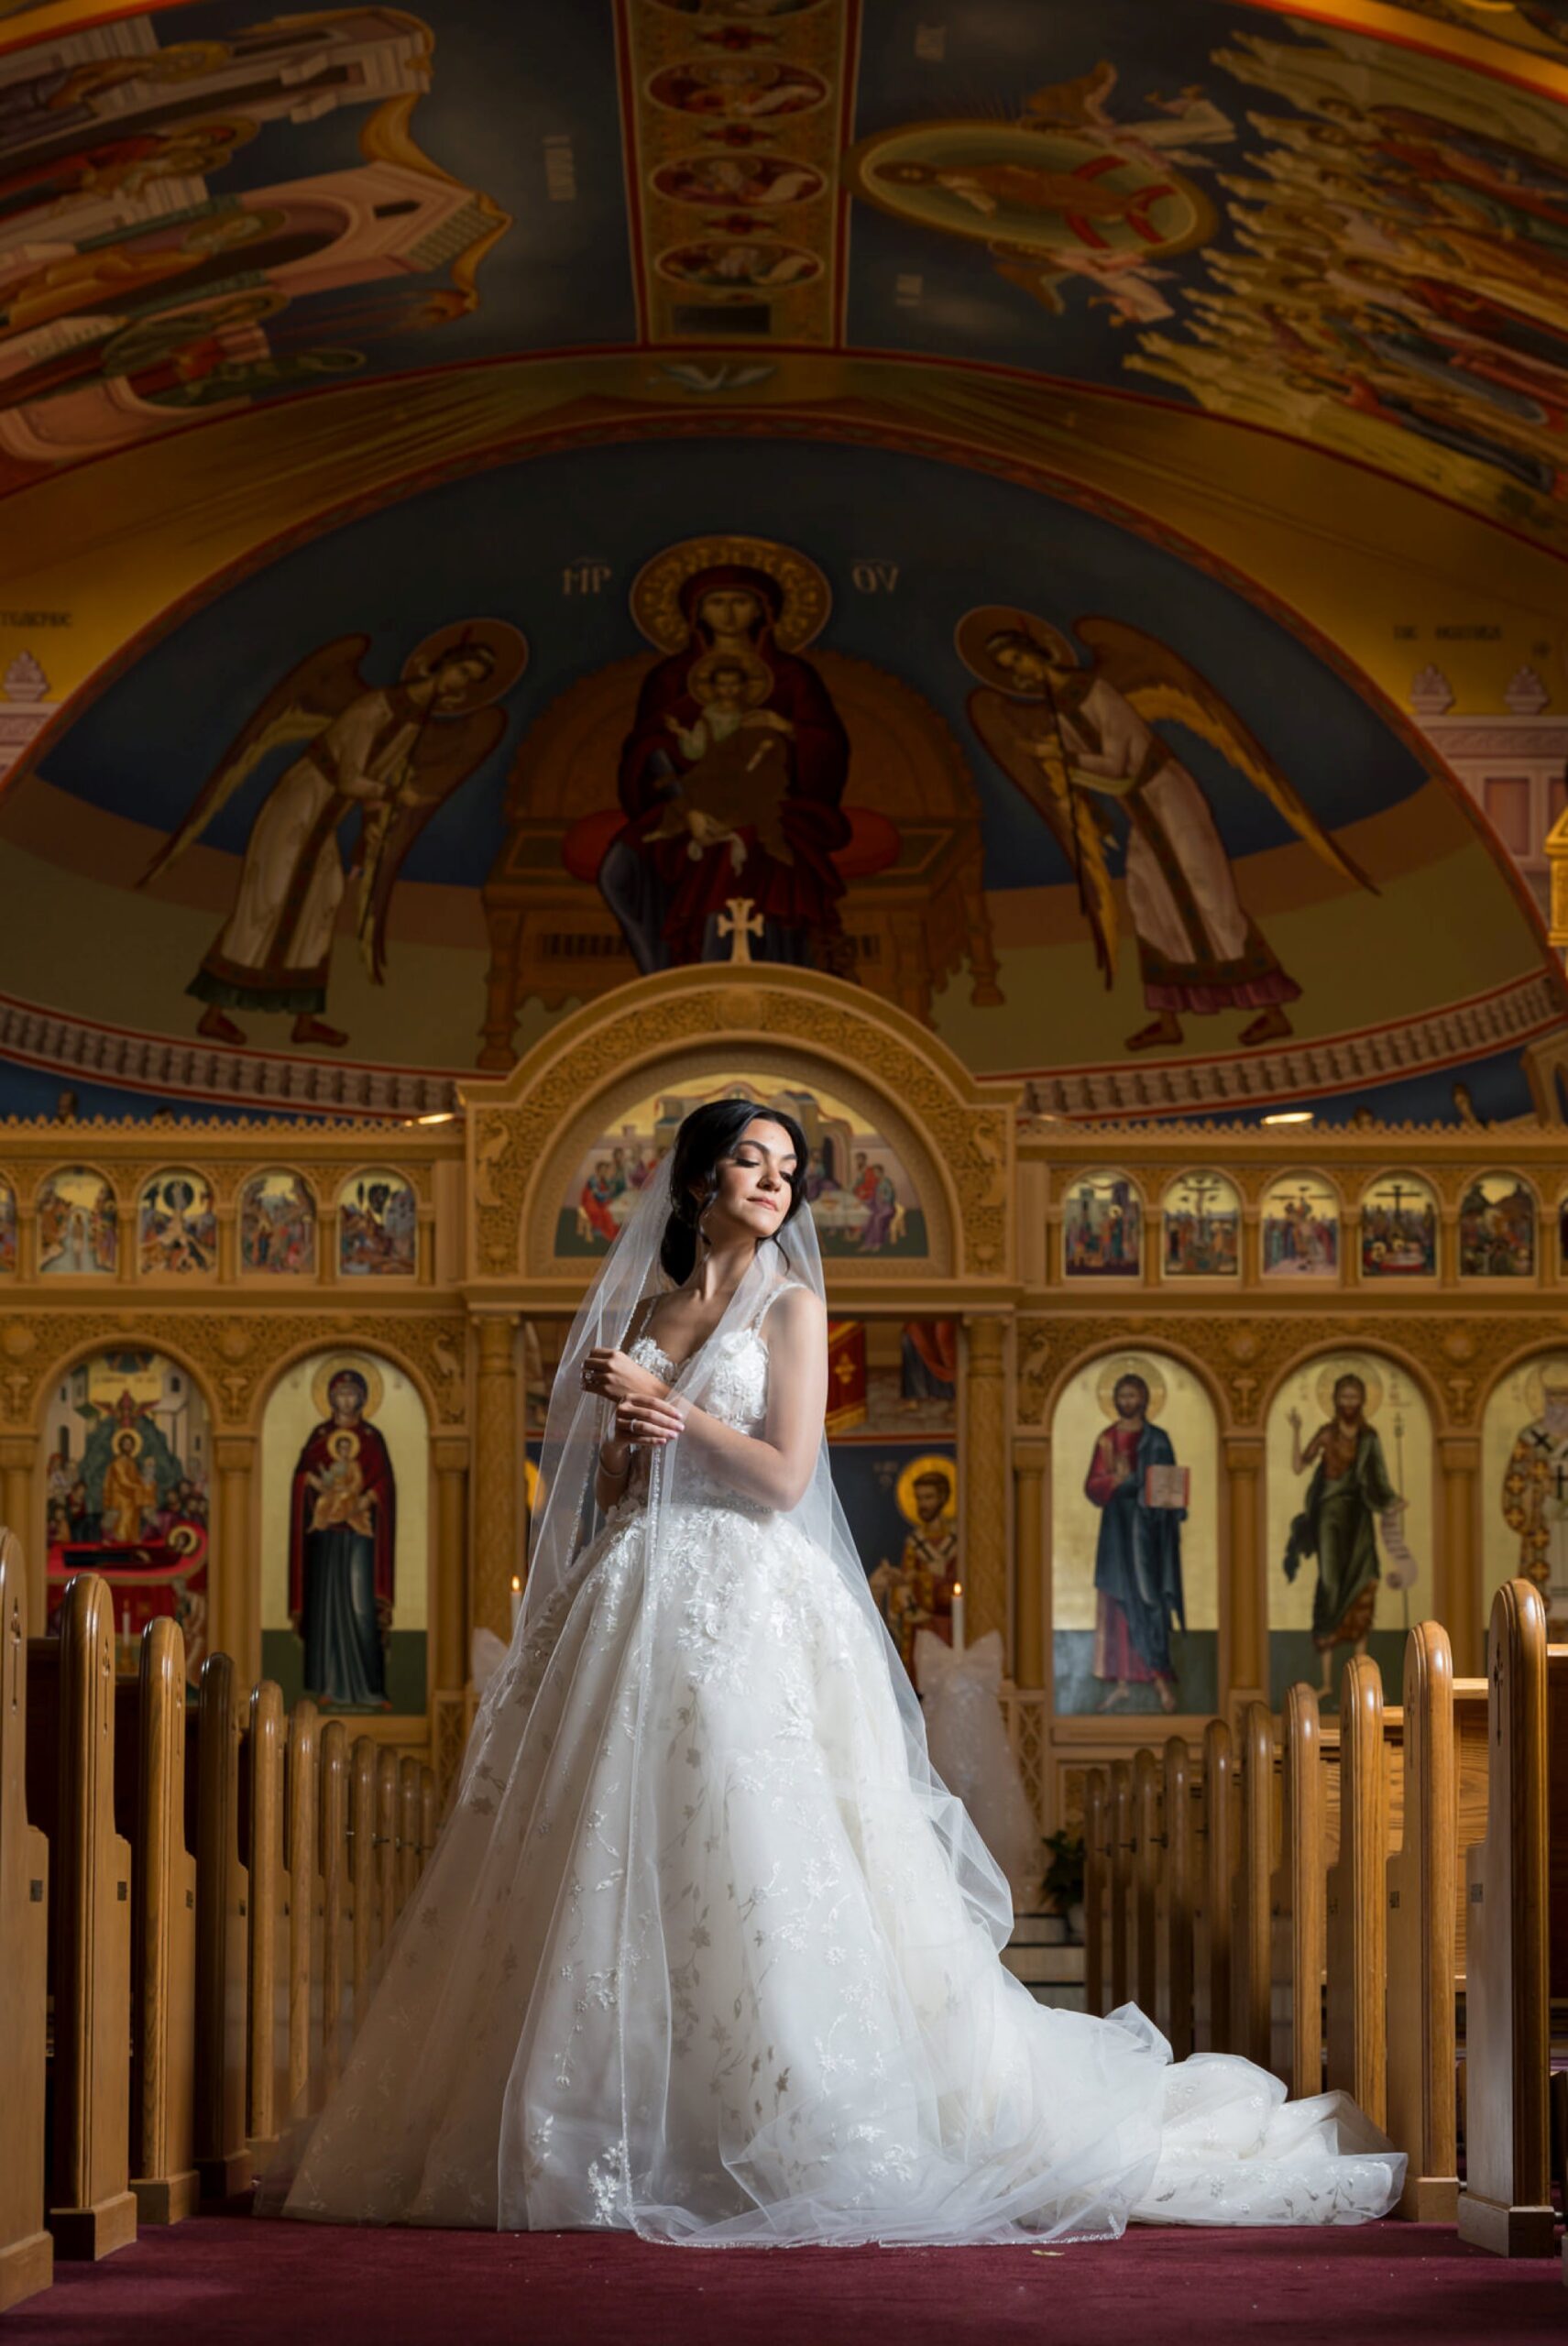 The bride poses in the center aisle of an Assumption Greek Orthodox wedding.